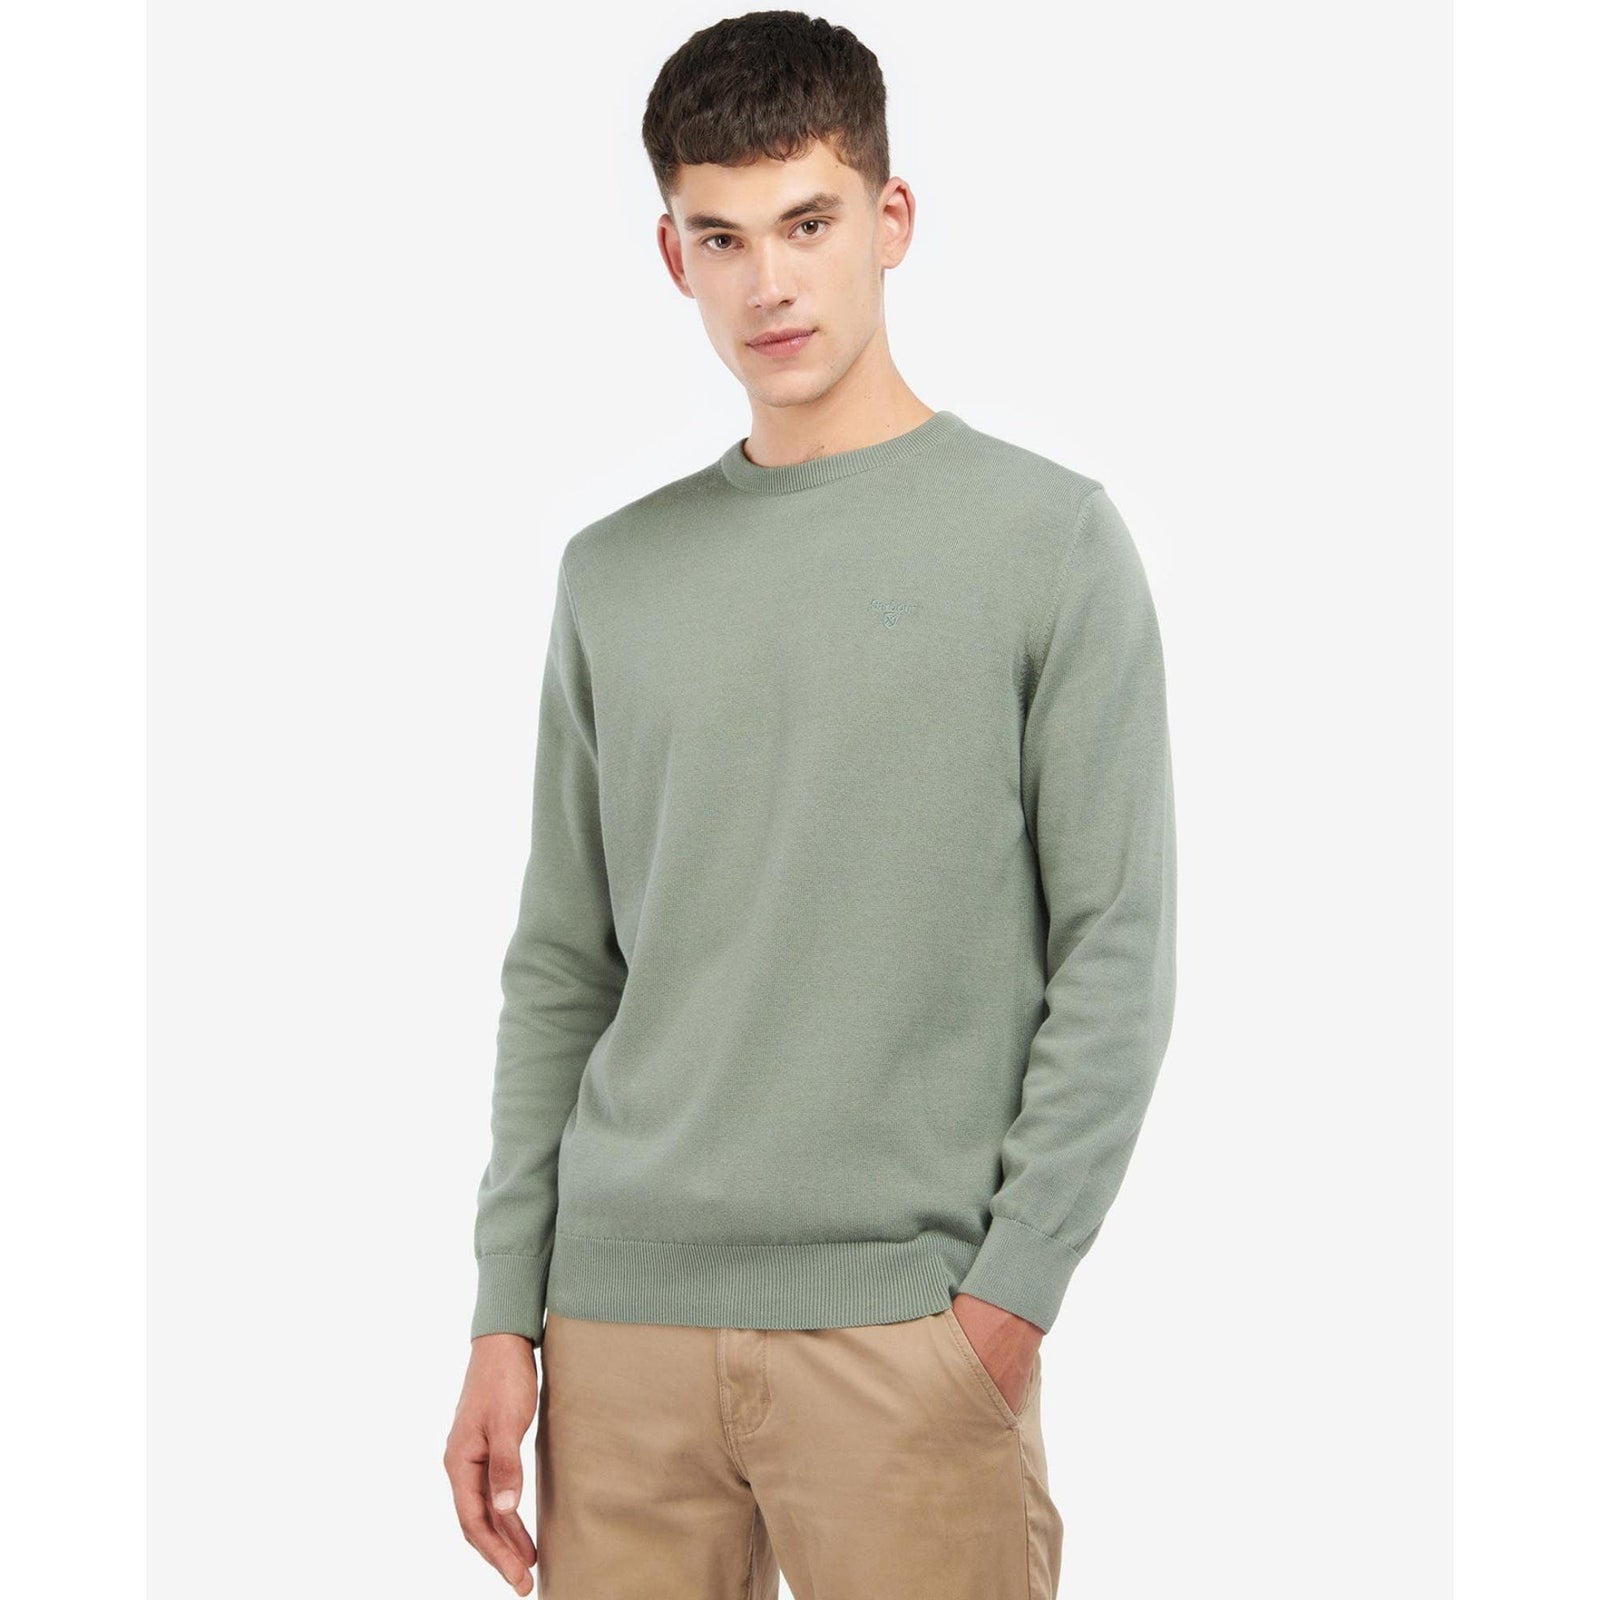 Barbour Pima Cotton Crew Neck in Agave Green